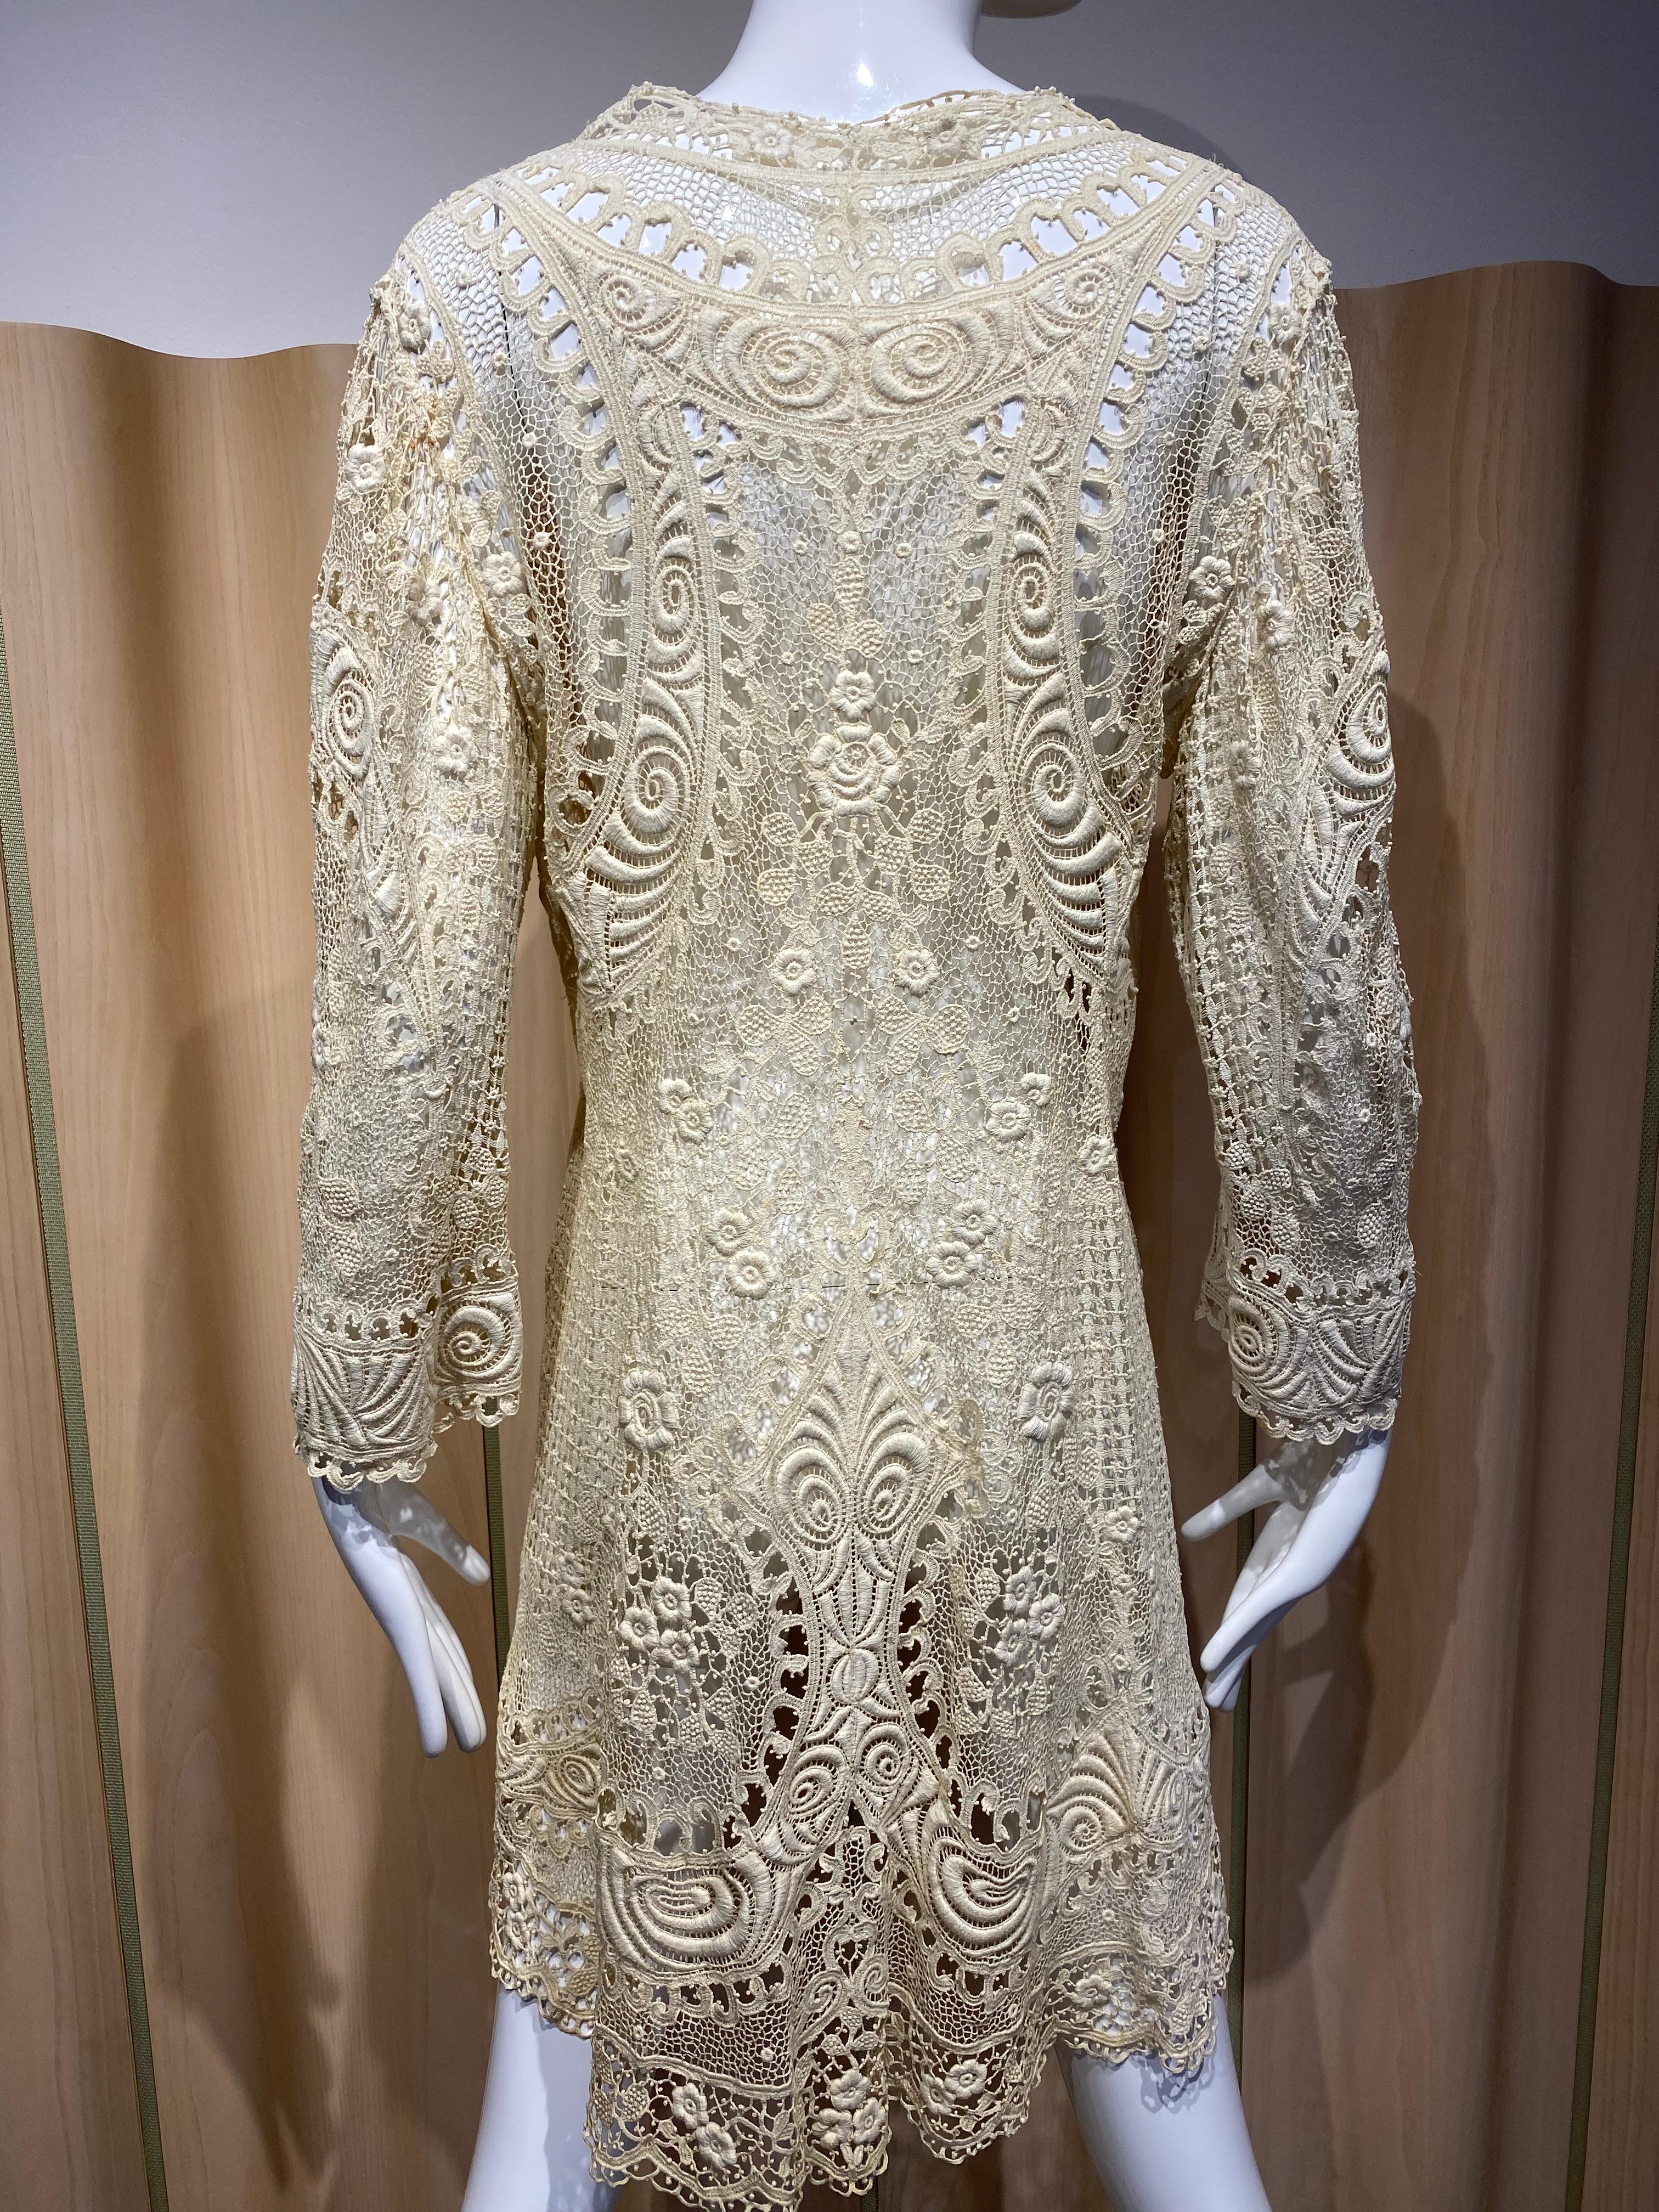 1900s Antique Cream Lace Cardigan Jacket perfect for wedding / bridal.
No fastener. Jacket in Great Condition. Size 2/4/6/8
Fit small to medium